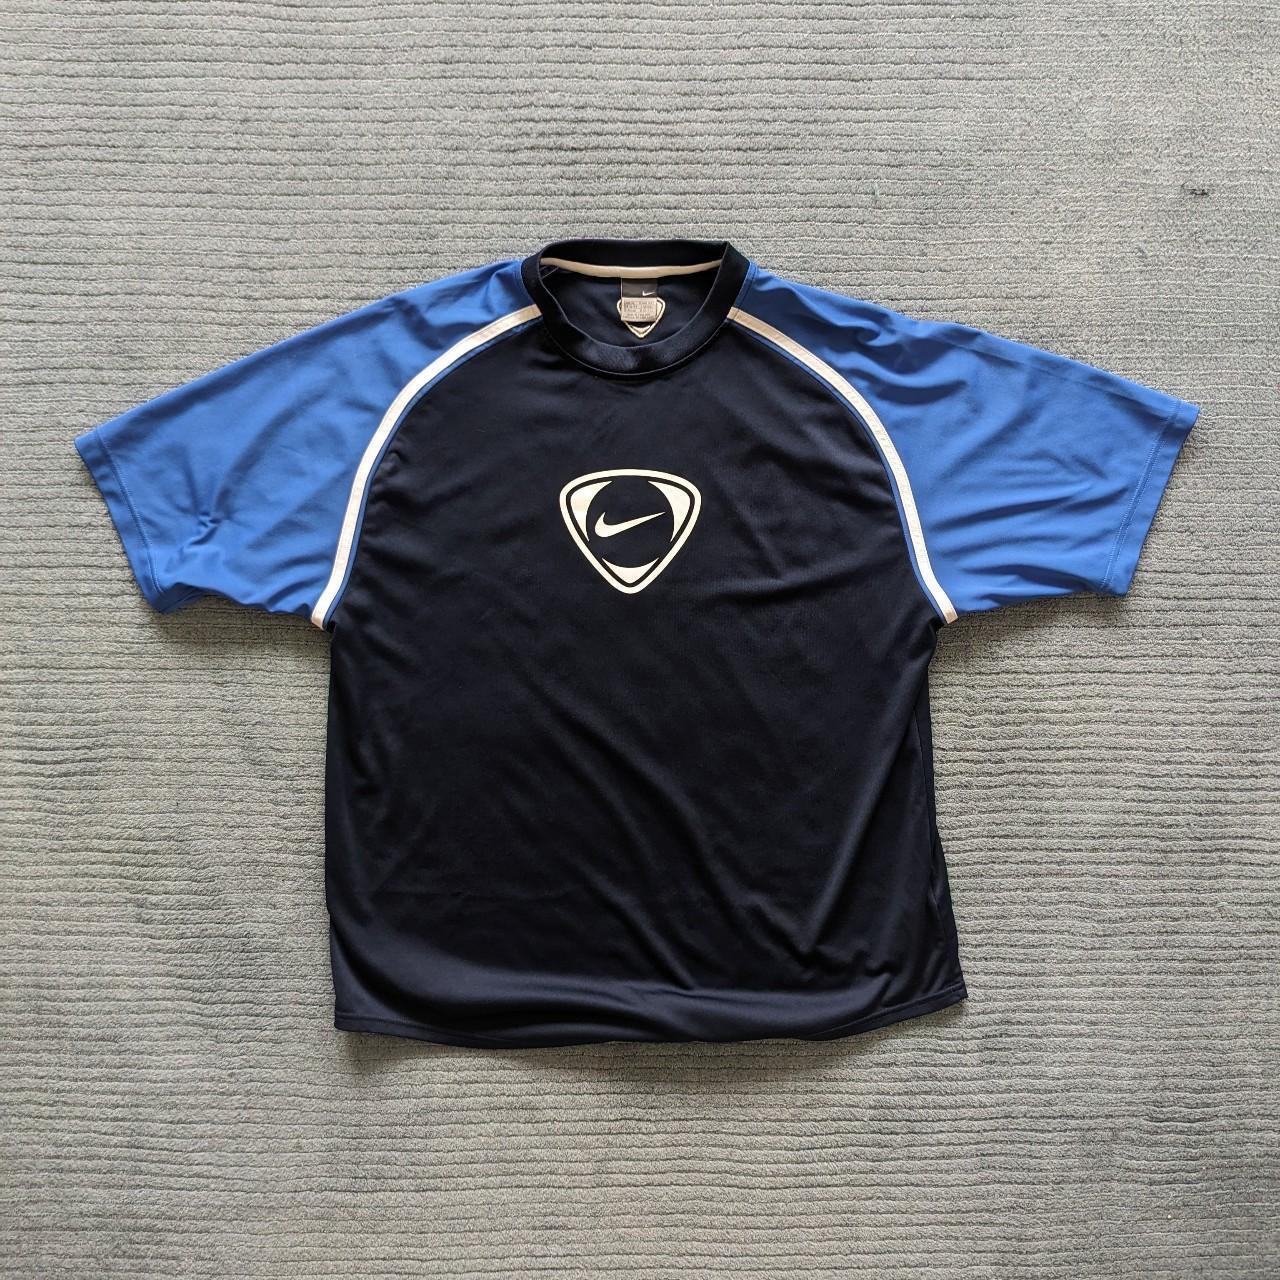 Nike centre swoosh t shirt in navy and blue. Good... - Depop